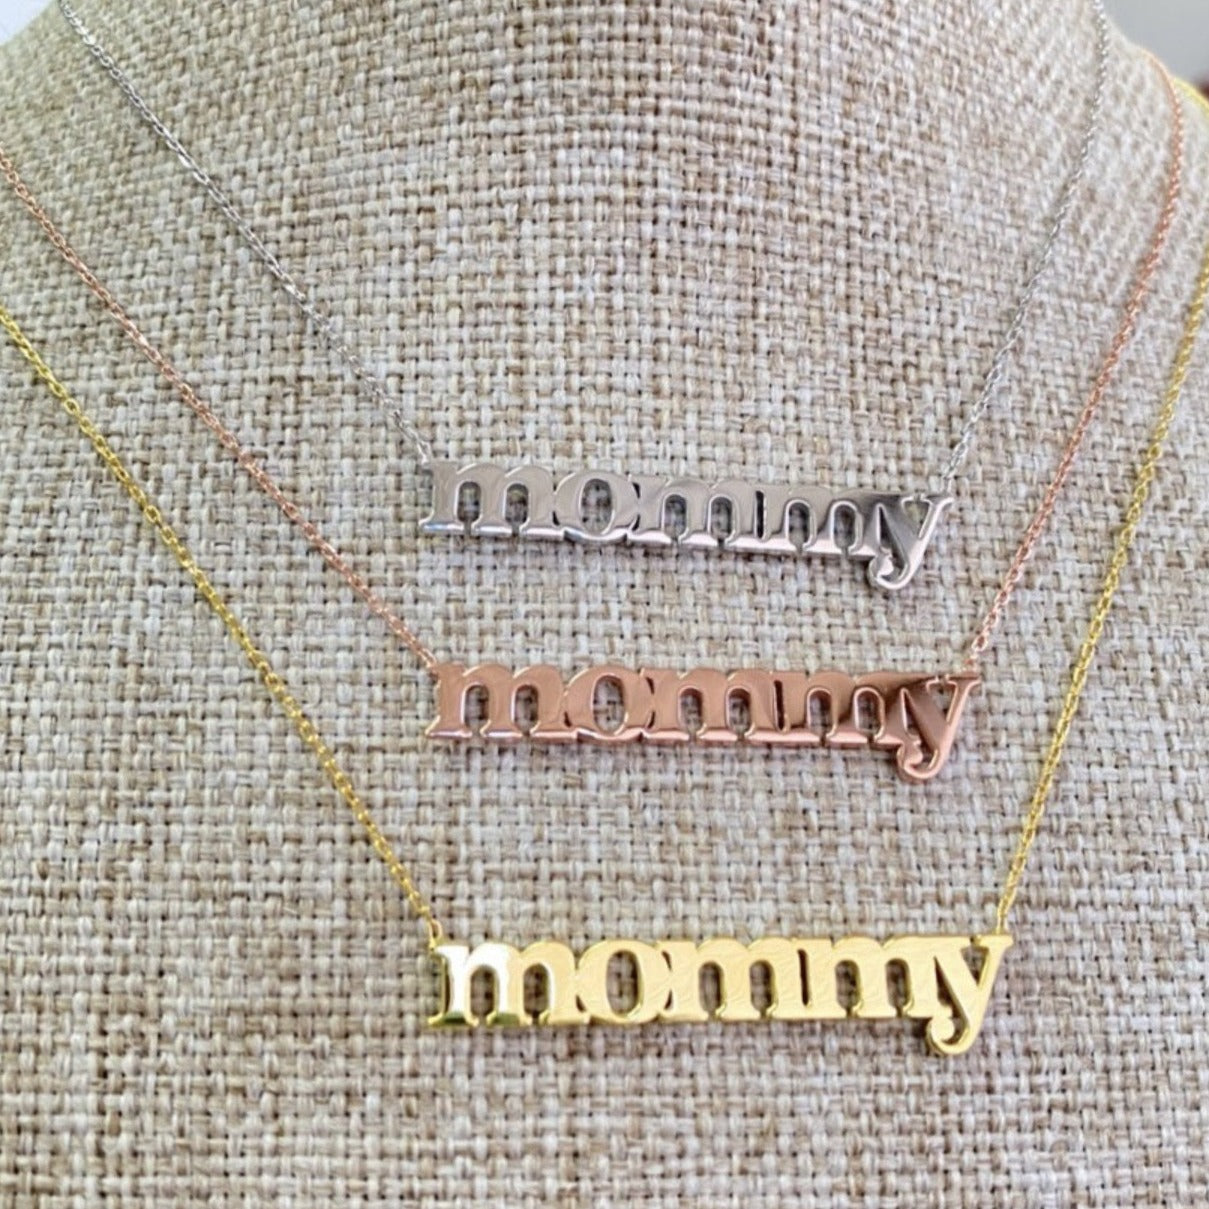 “mommy” Necklace